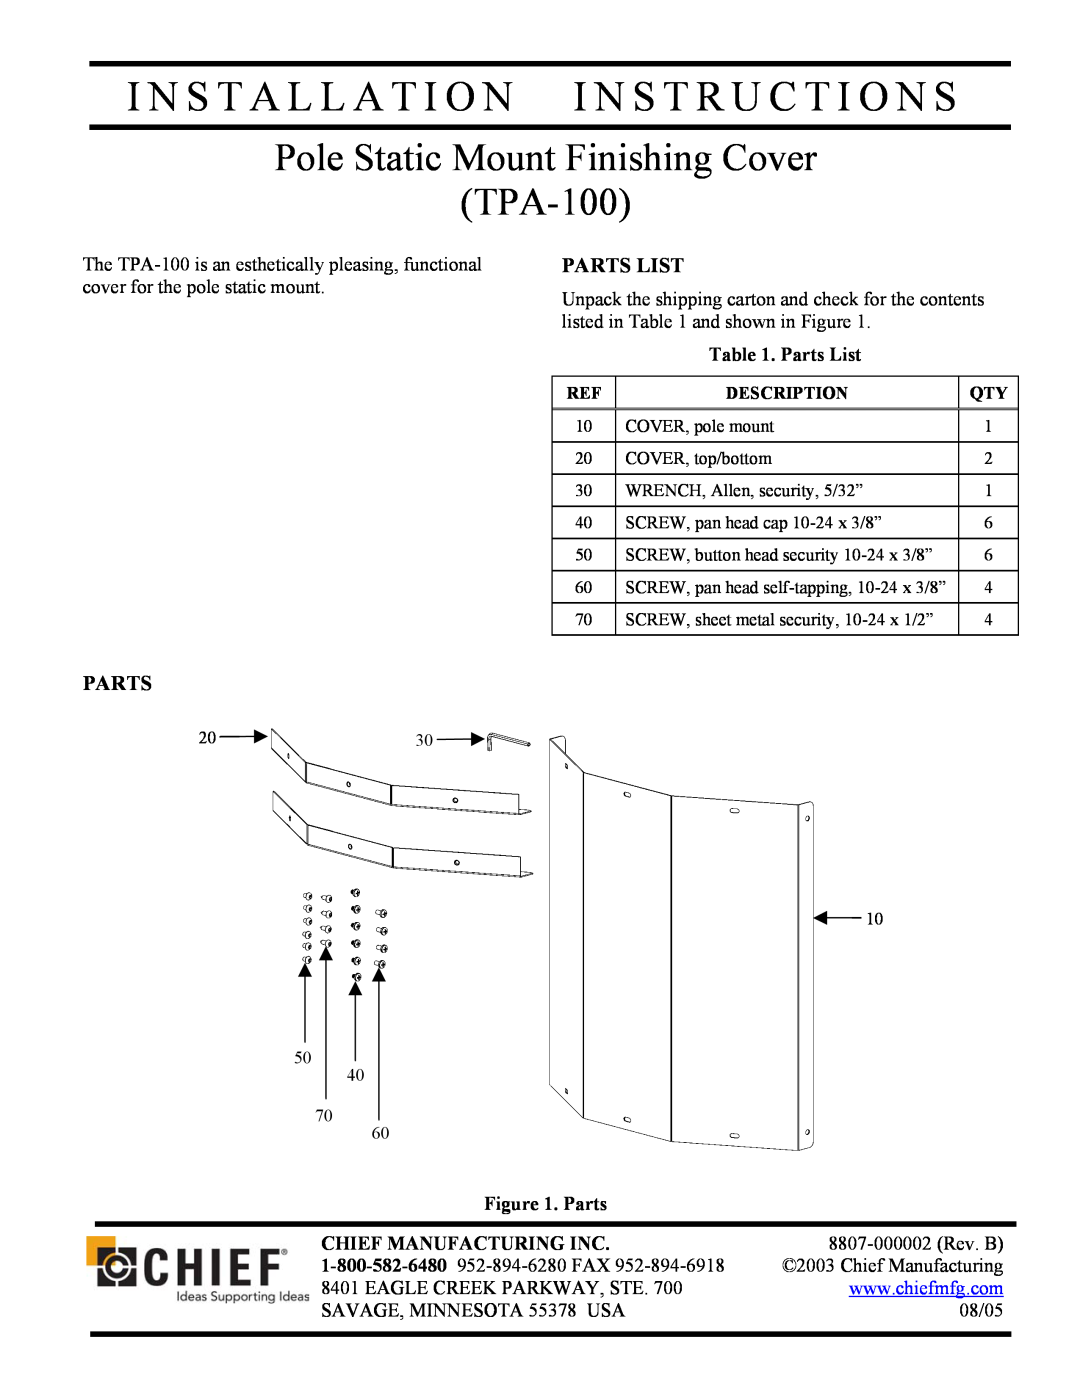 Chief Manufacturing TPA-100 installation instructions Parts List, Chief Manufacturing Inc 